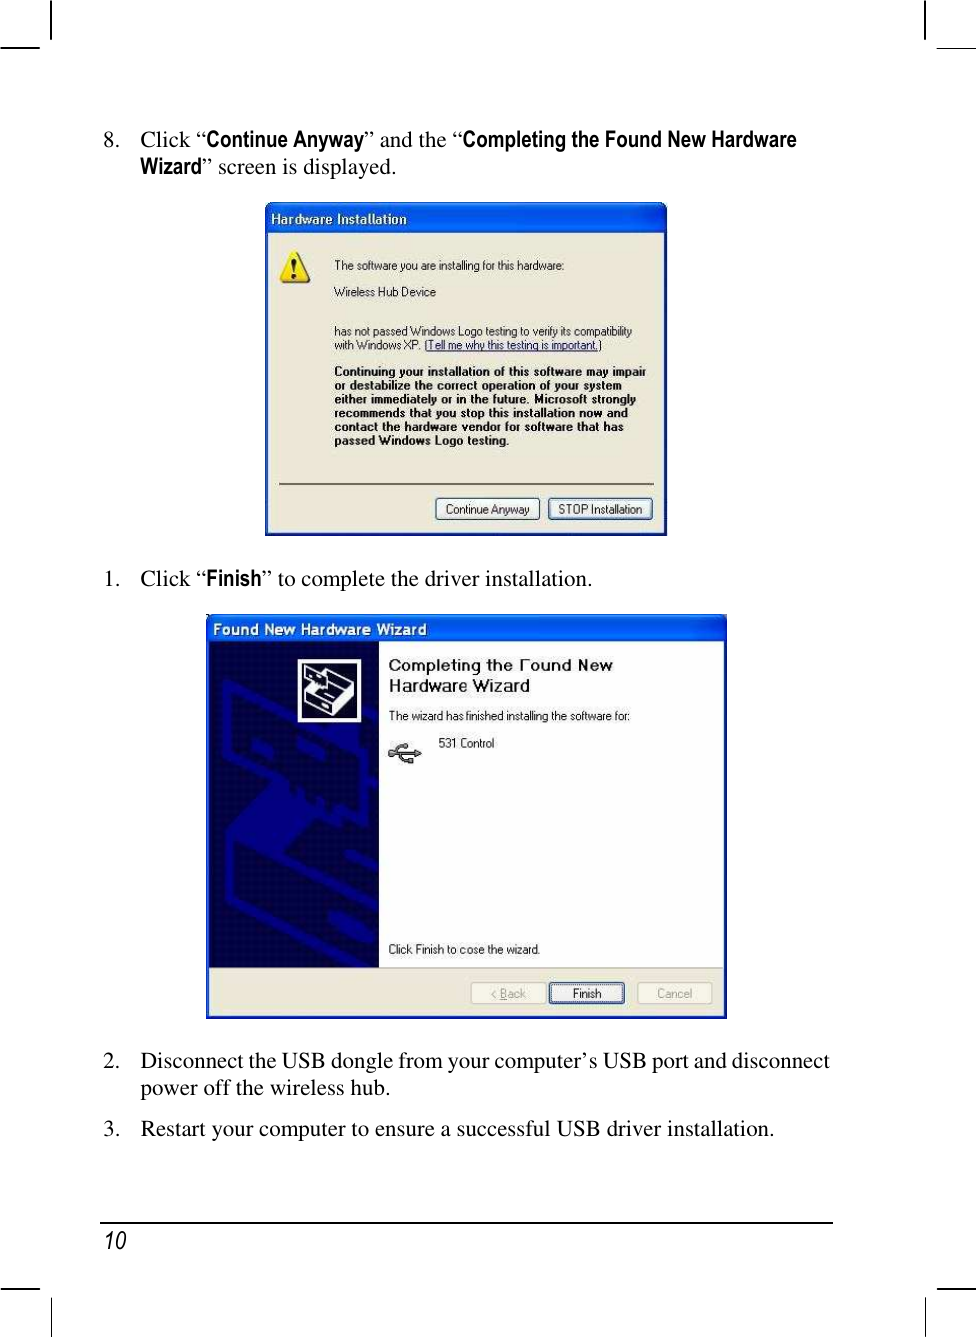  10 8. Click “Continue Anyway” and the “Completing the Found New Hardware Wizard” screen is displayed.  1. Click “Finish” to complete the driver installation.  2. Disconnect the USB dongle from your computer’s USB port and disconnect power off the wireless hub. 3. Restart your computer to ensure a successful USB driver installation. 